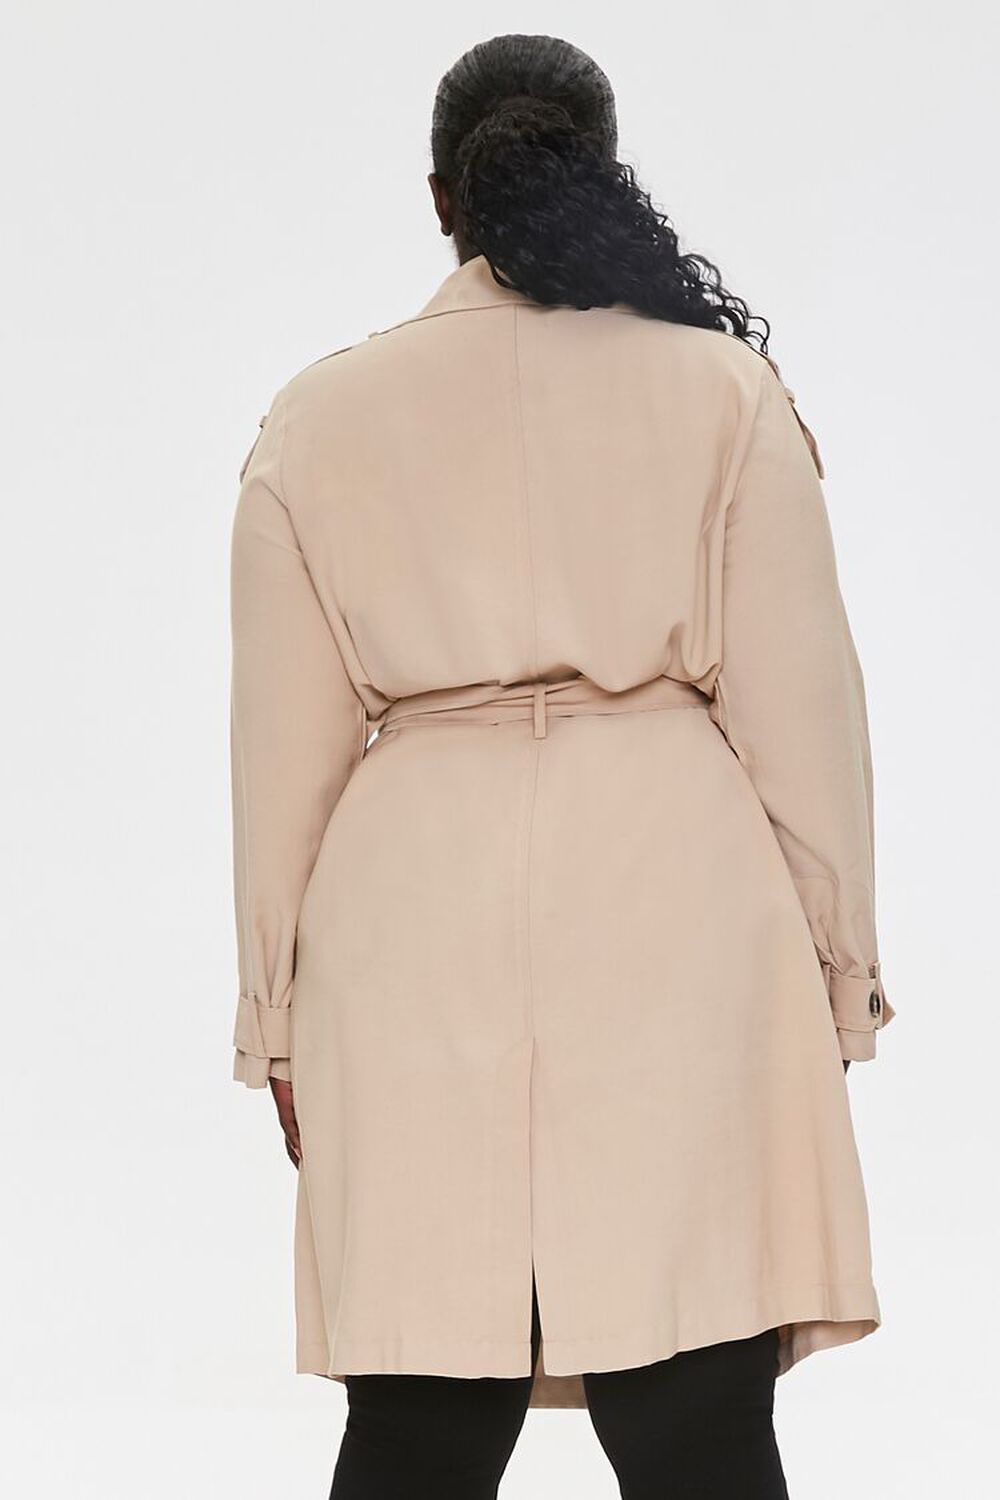 TAUPE Plus Size Double-Breasted Coat, image 3